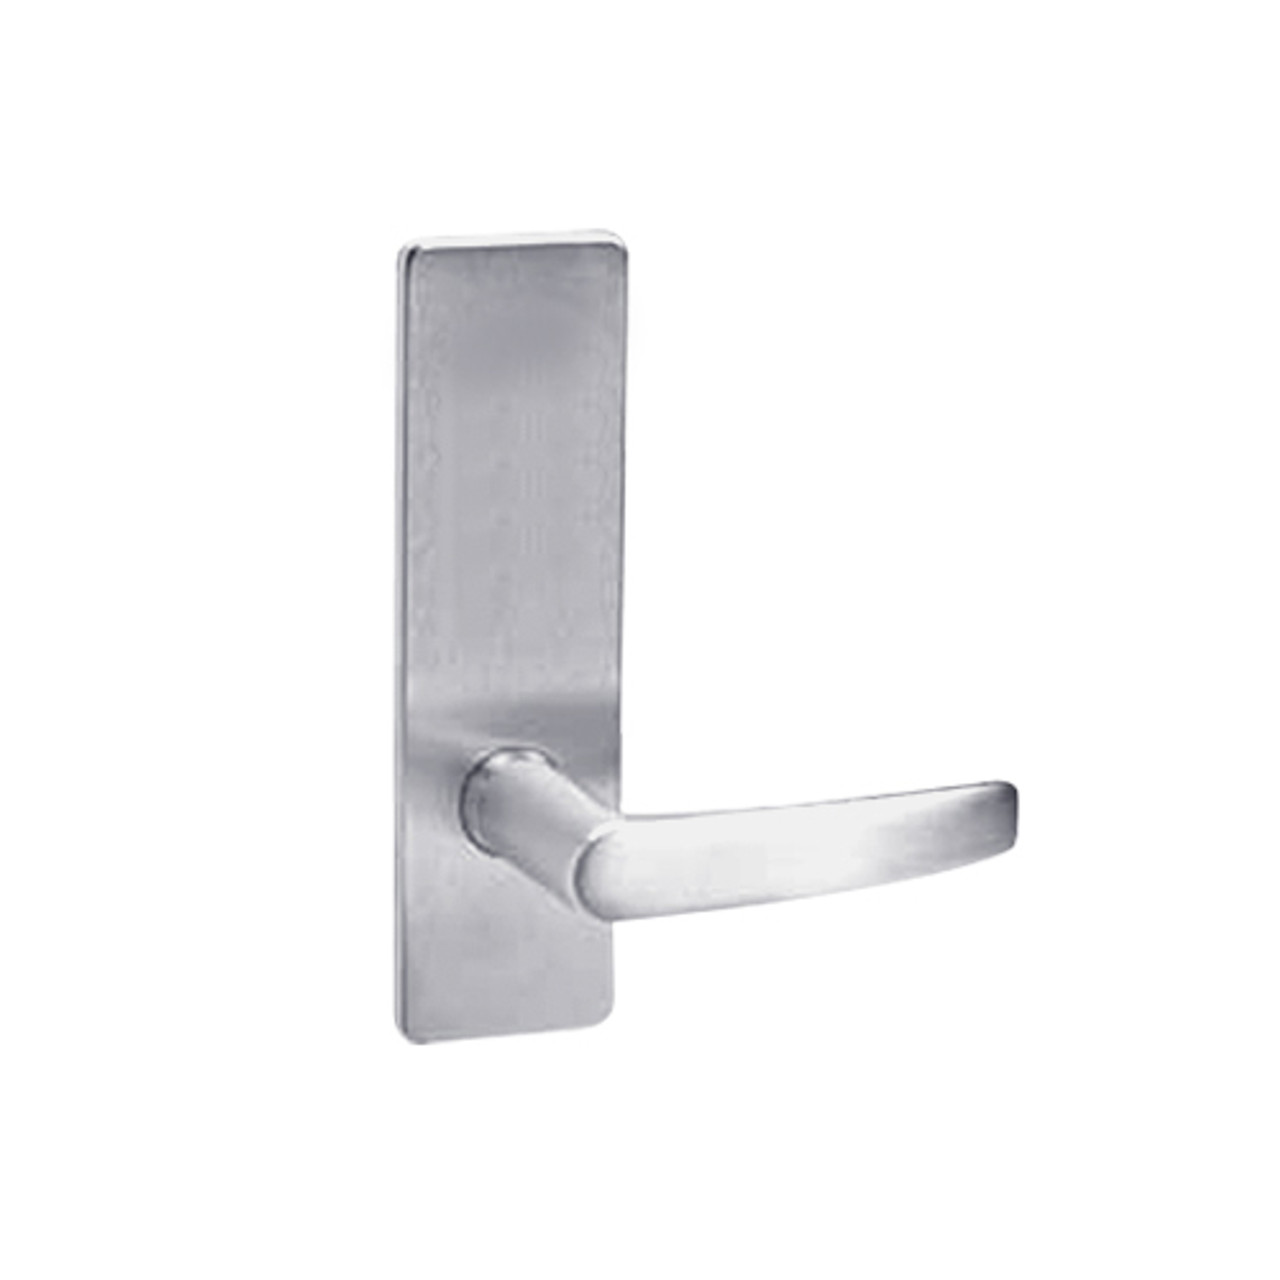 ML2060-ASR-626-M31 Corbin Russwin ML2000 Series Mortise Privacy Locksets with Armstrong Lever in Satin Chrome